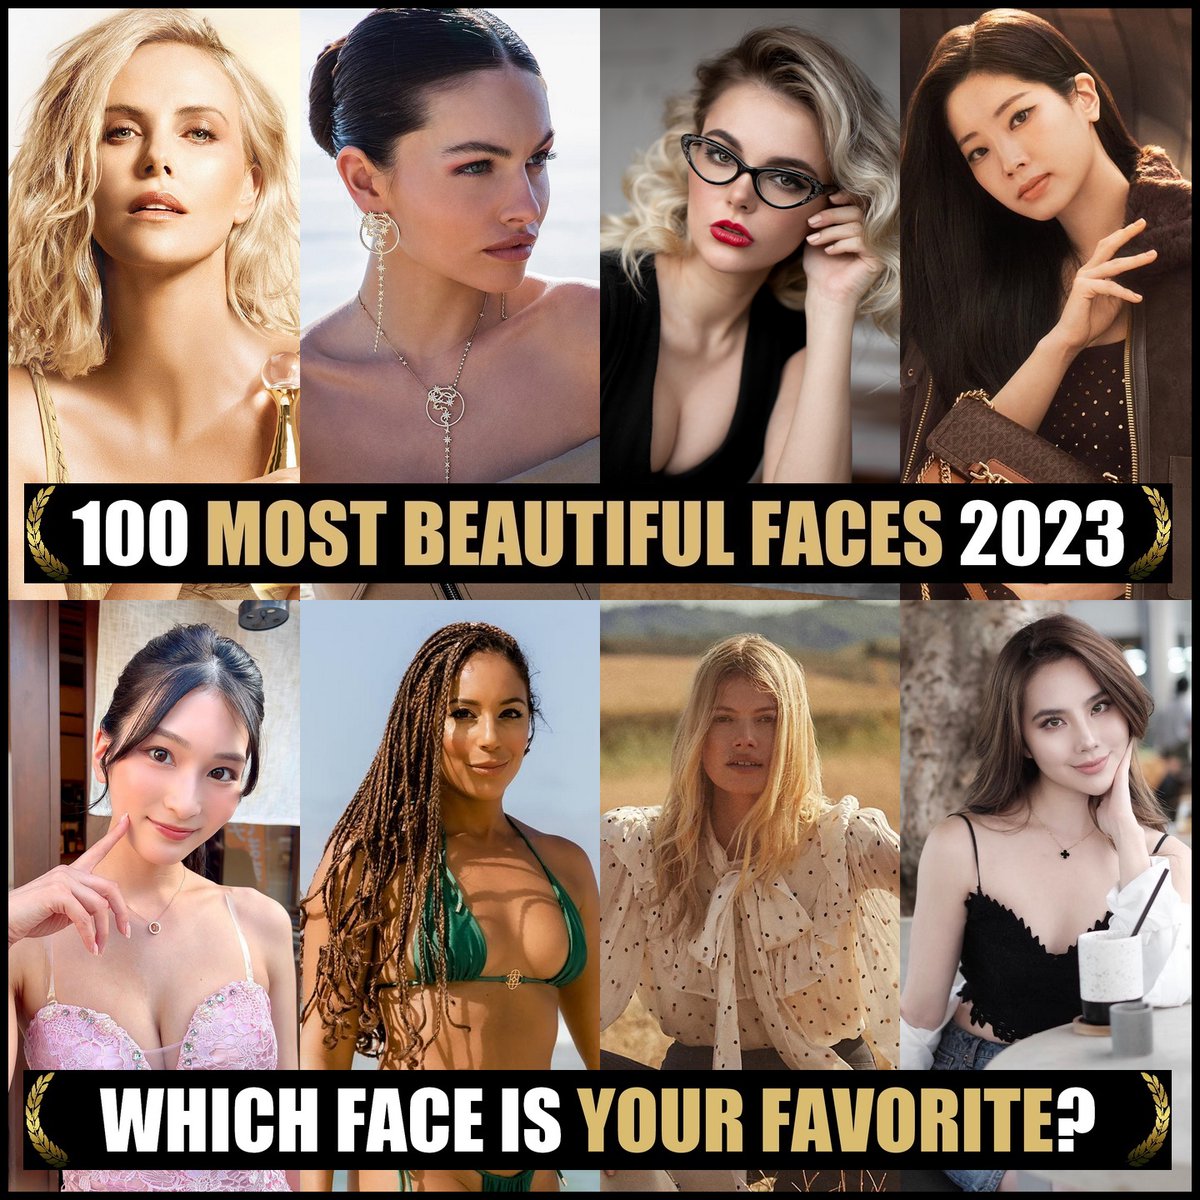 Nominations: 100 Most Beautiful Faces 2023. Congrats! Would you like to nominate & vote? Please join our Patreon community (Link Bio) #TCCandler #100faces2023 #charlizetheron #thylaneblondeau #oktyabrinamaximova #DAHYUN #twice #jyp #honjosuzu #agathachelsea